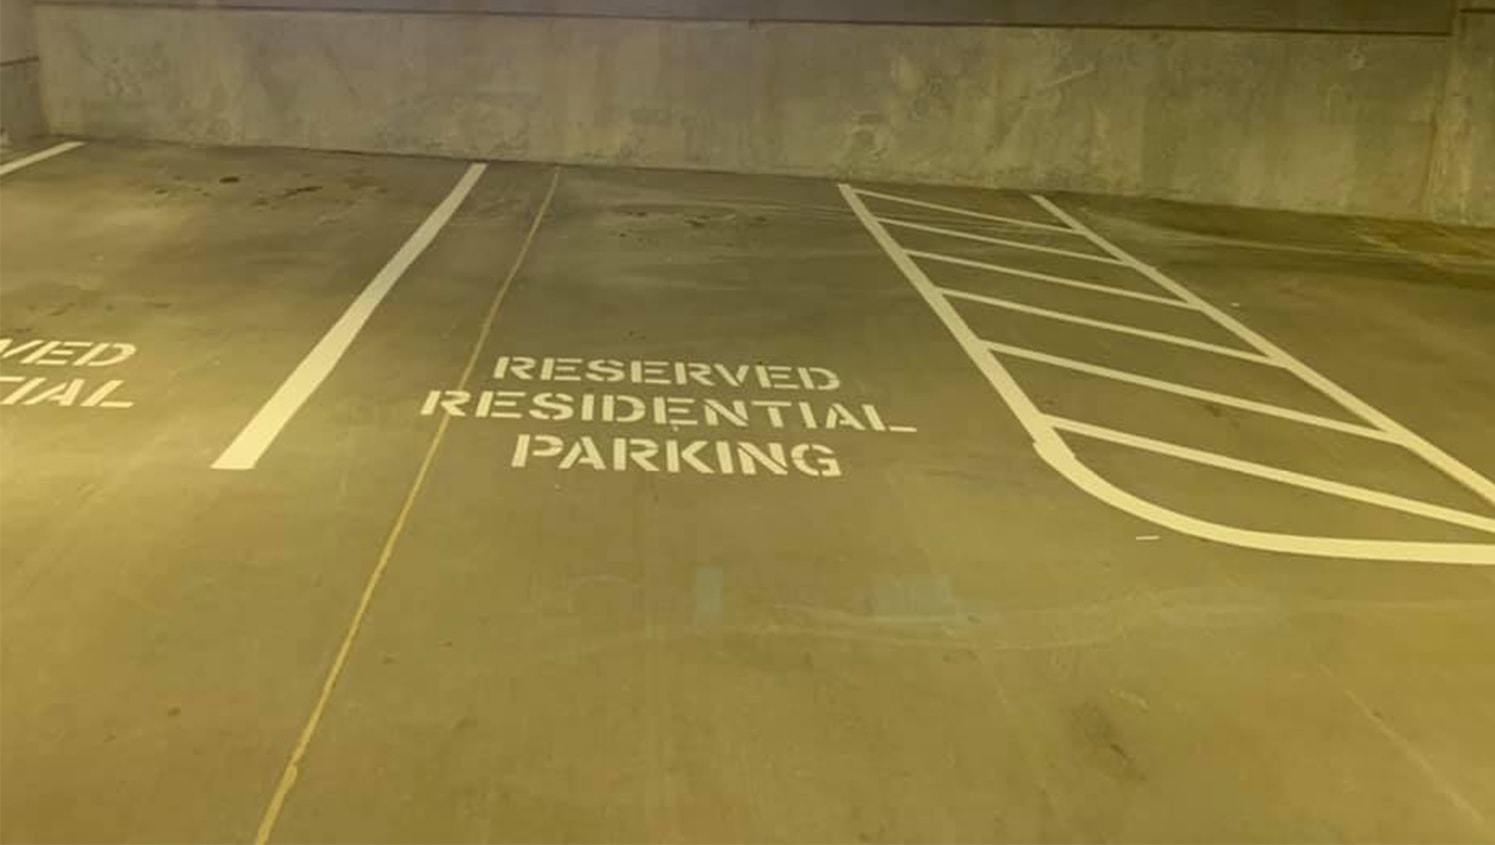 reserved residential parking stencil